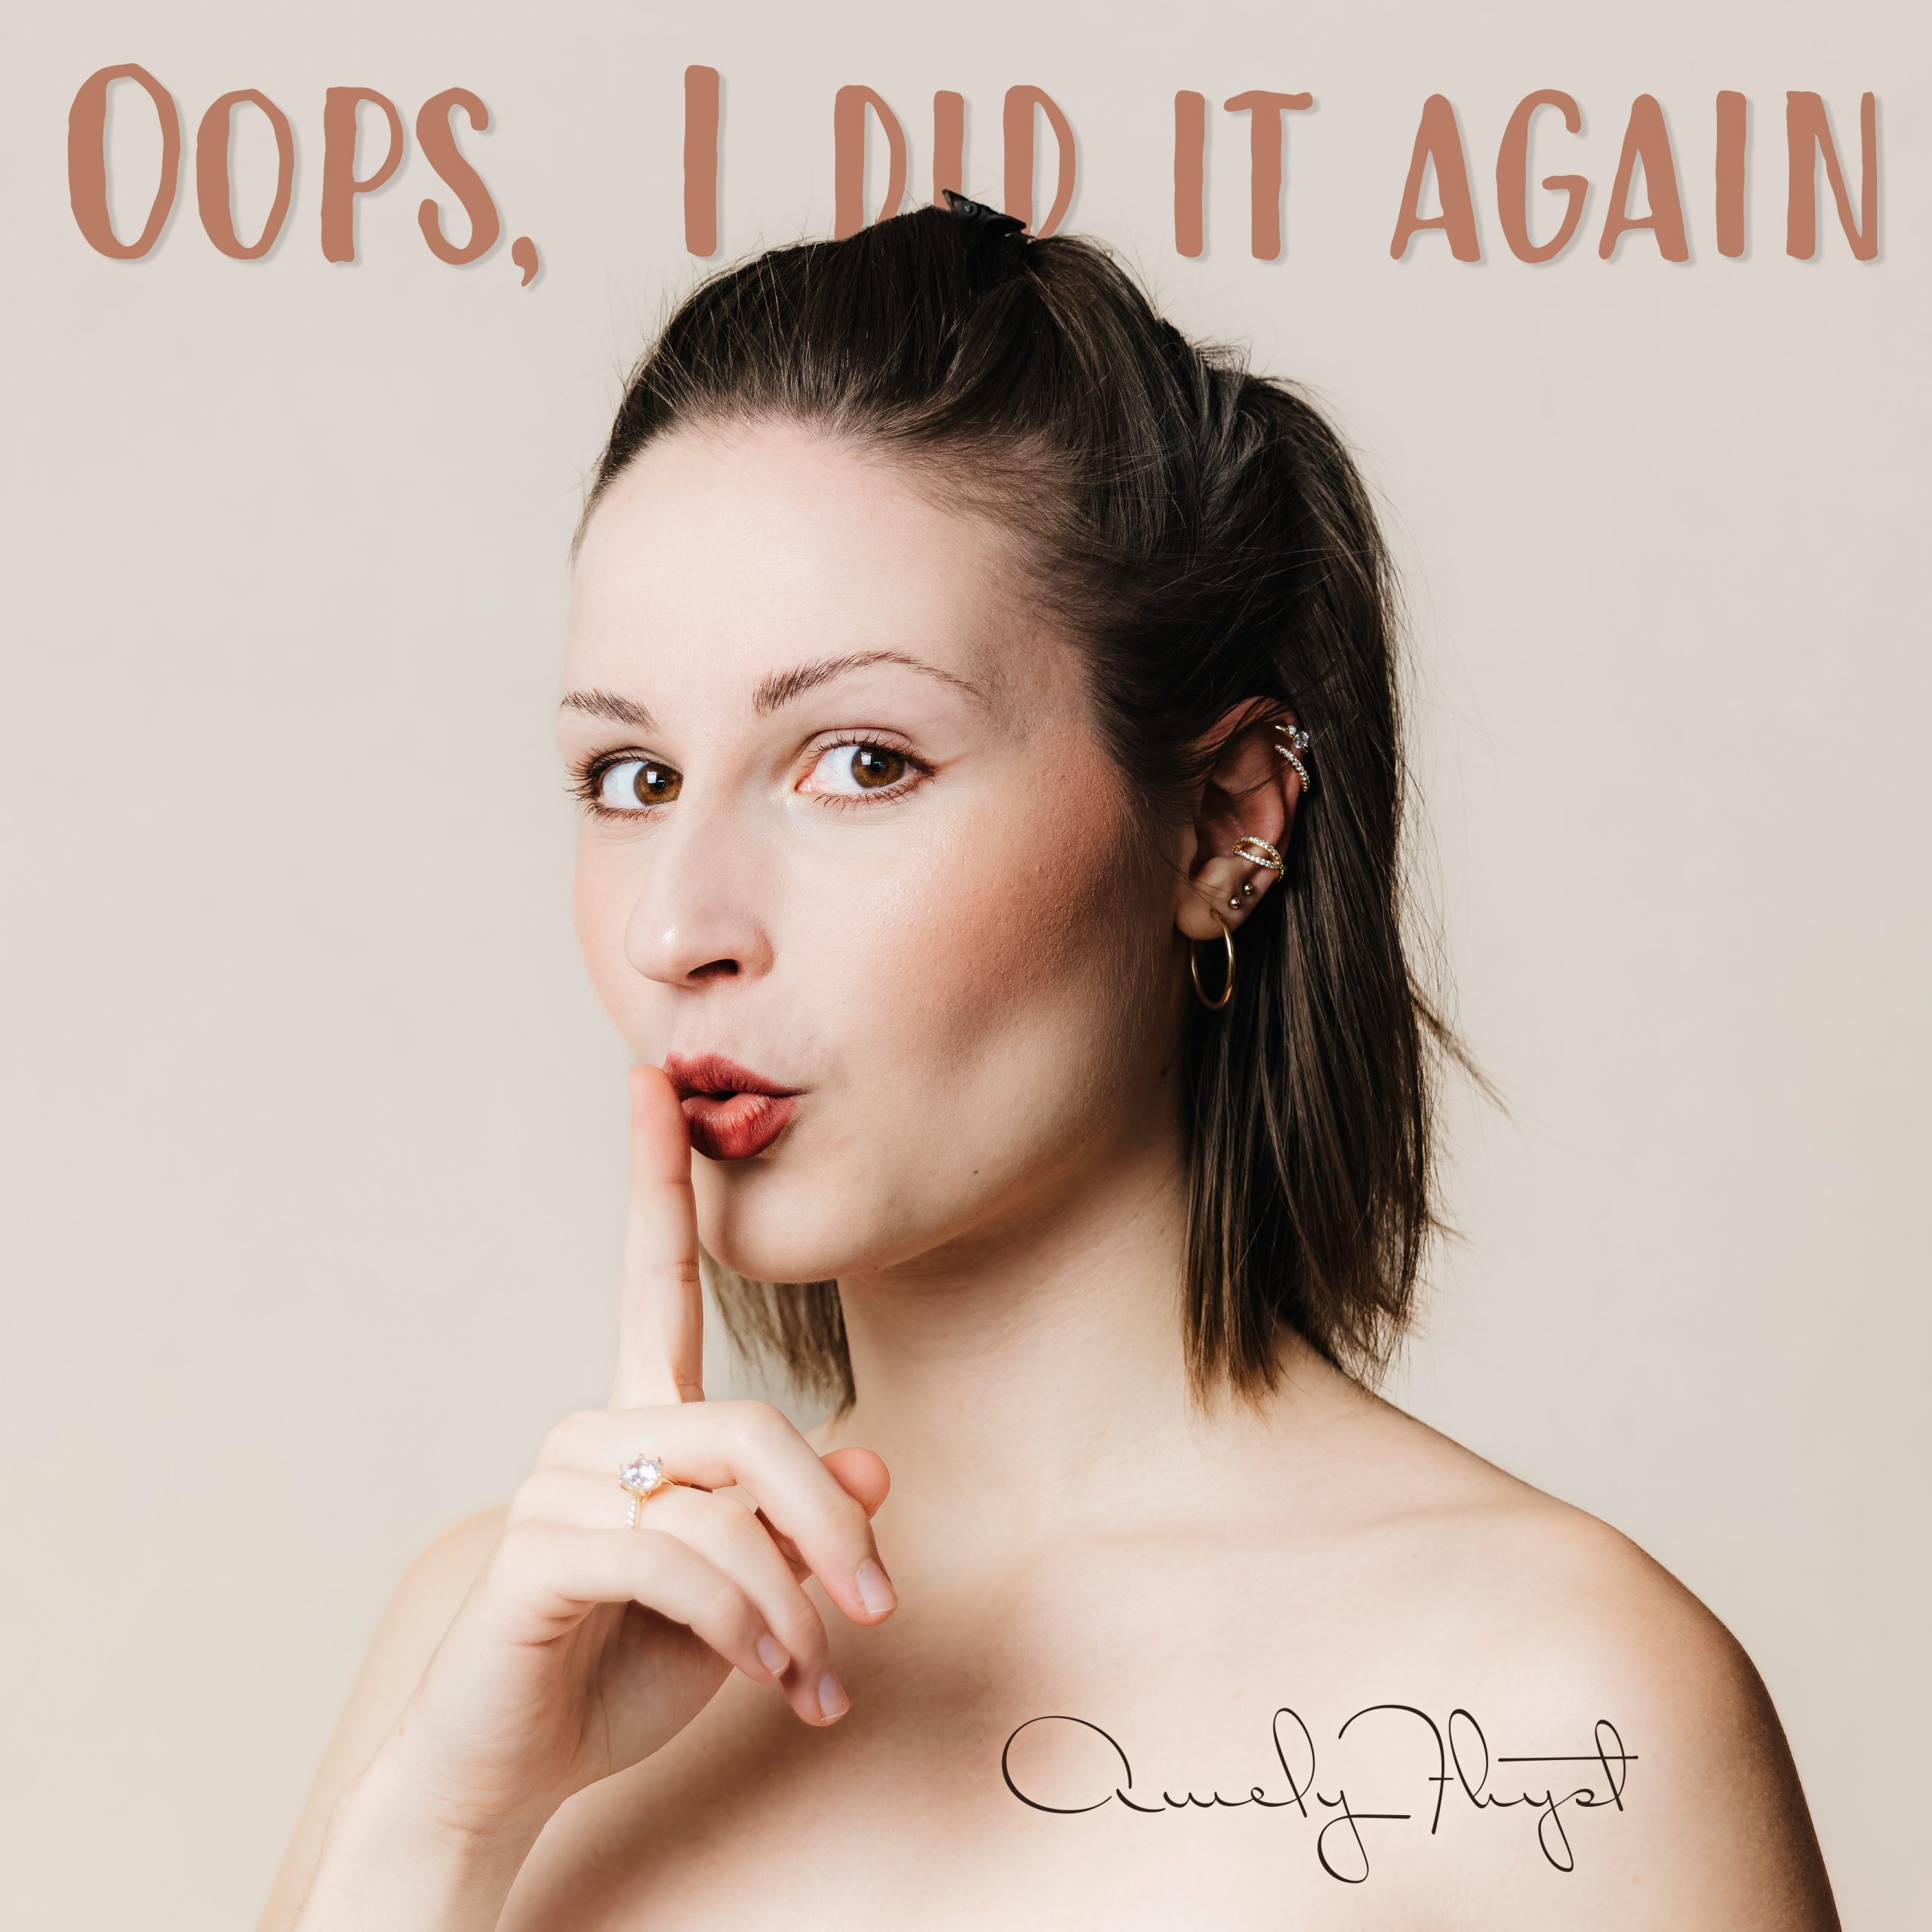 Oops I did it again: Available now on all music sites!